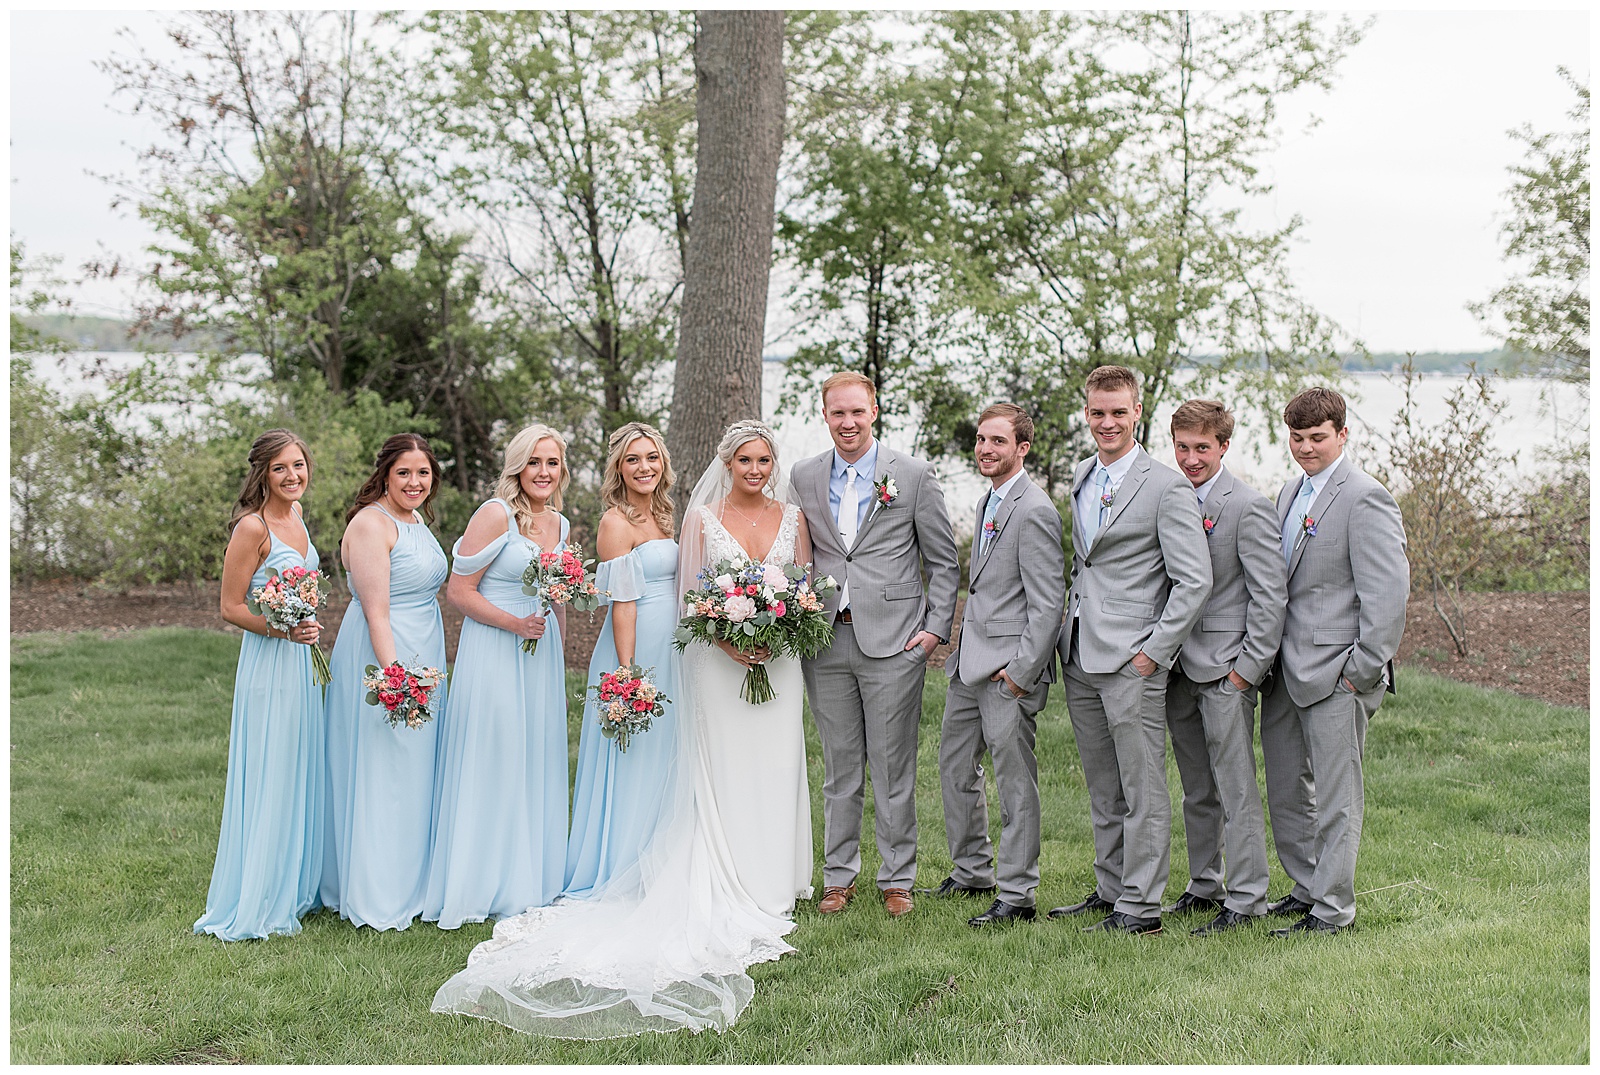 bride and groom with bridal party on grass lawn by large trees in forest hills maryland